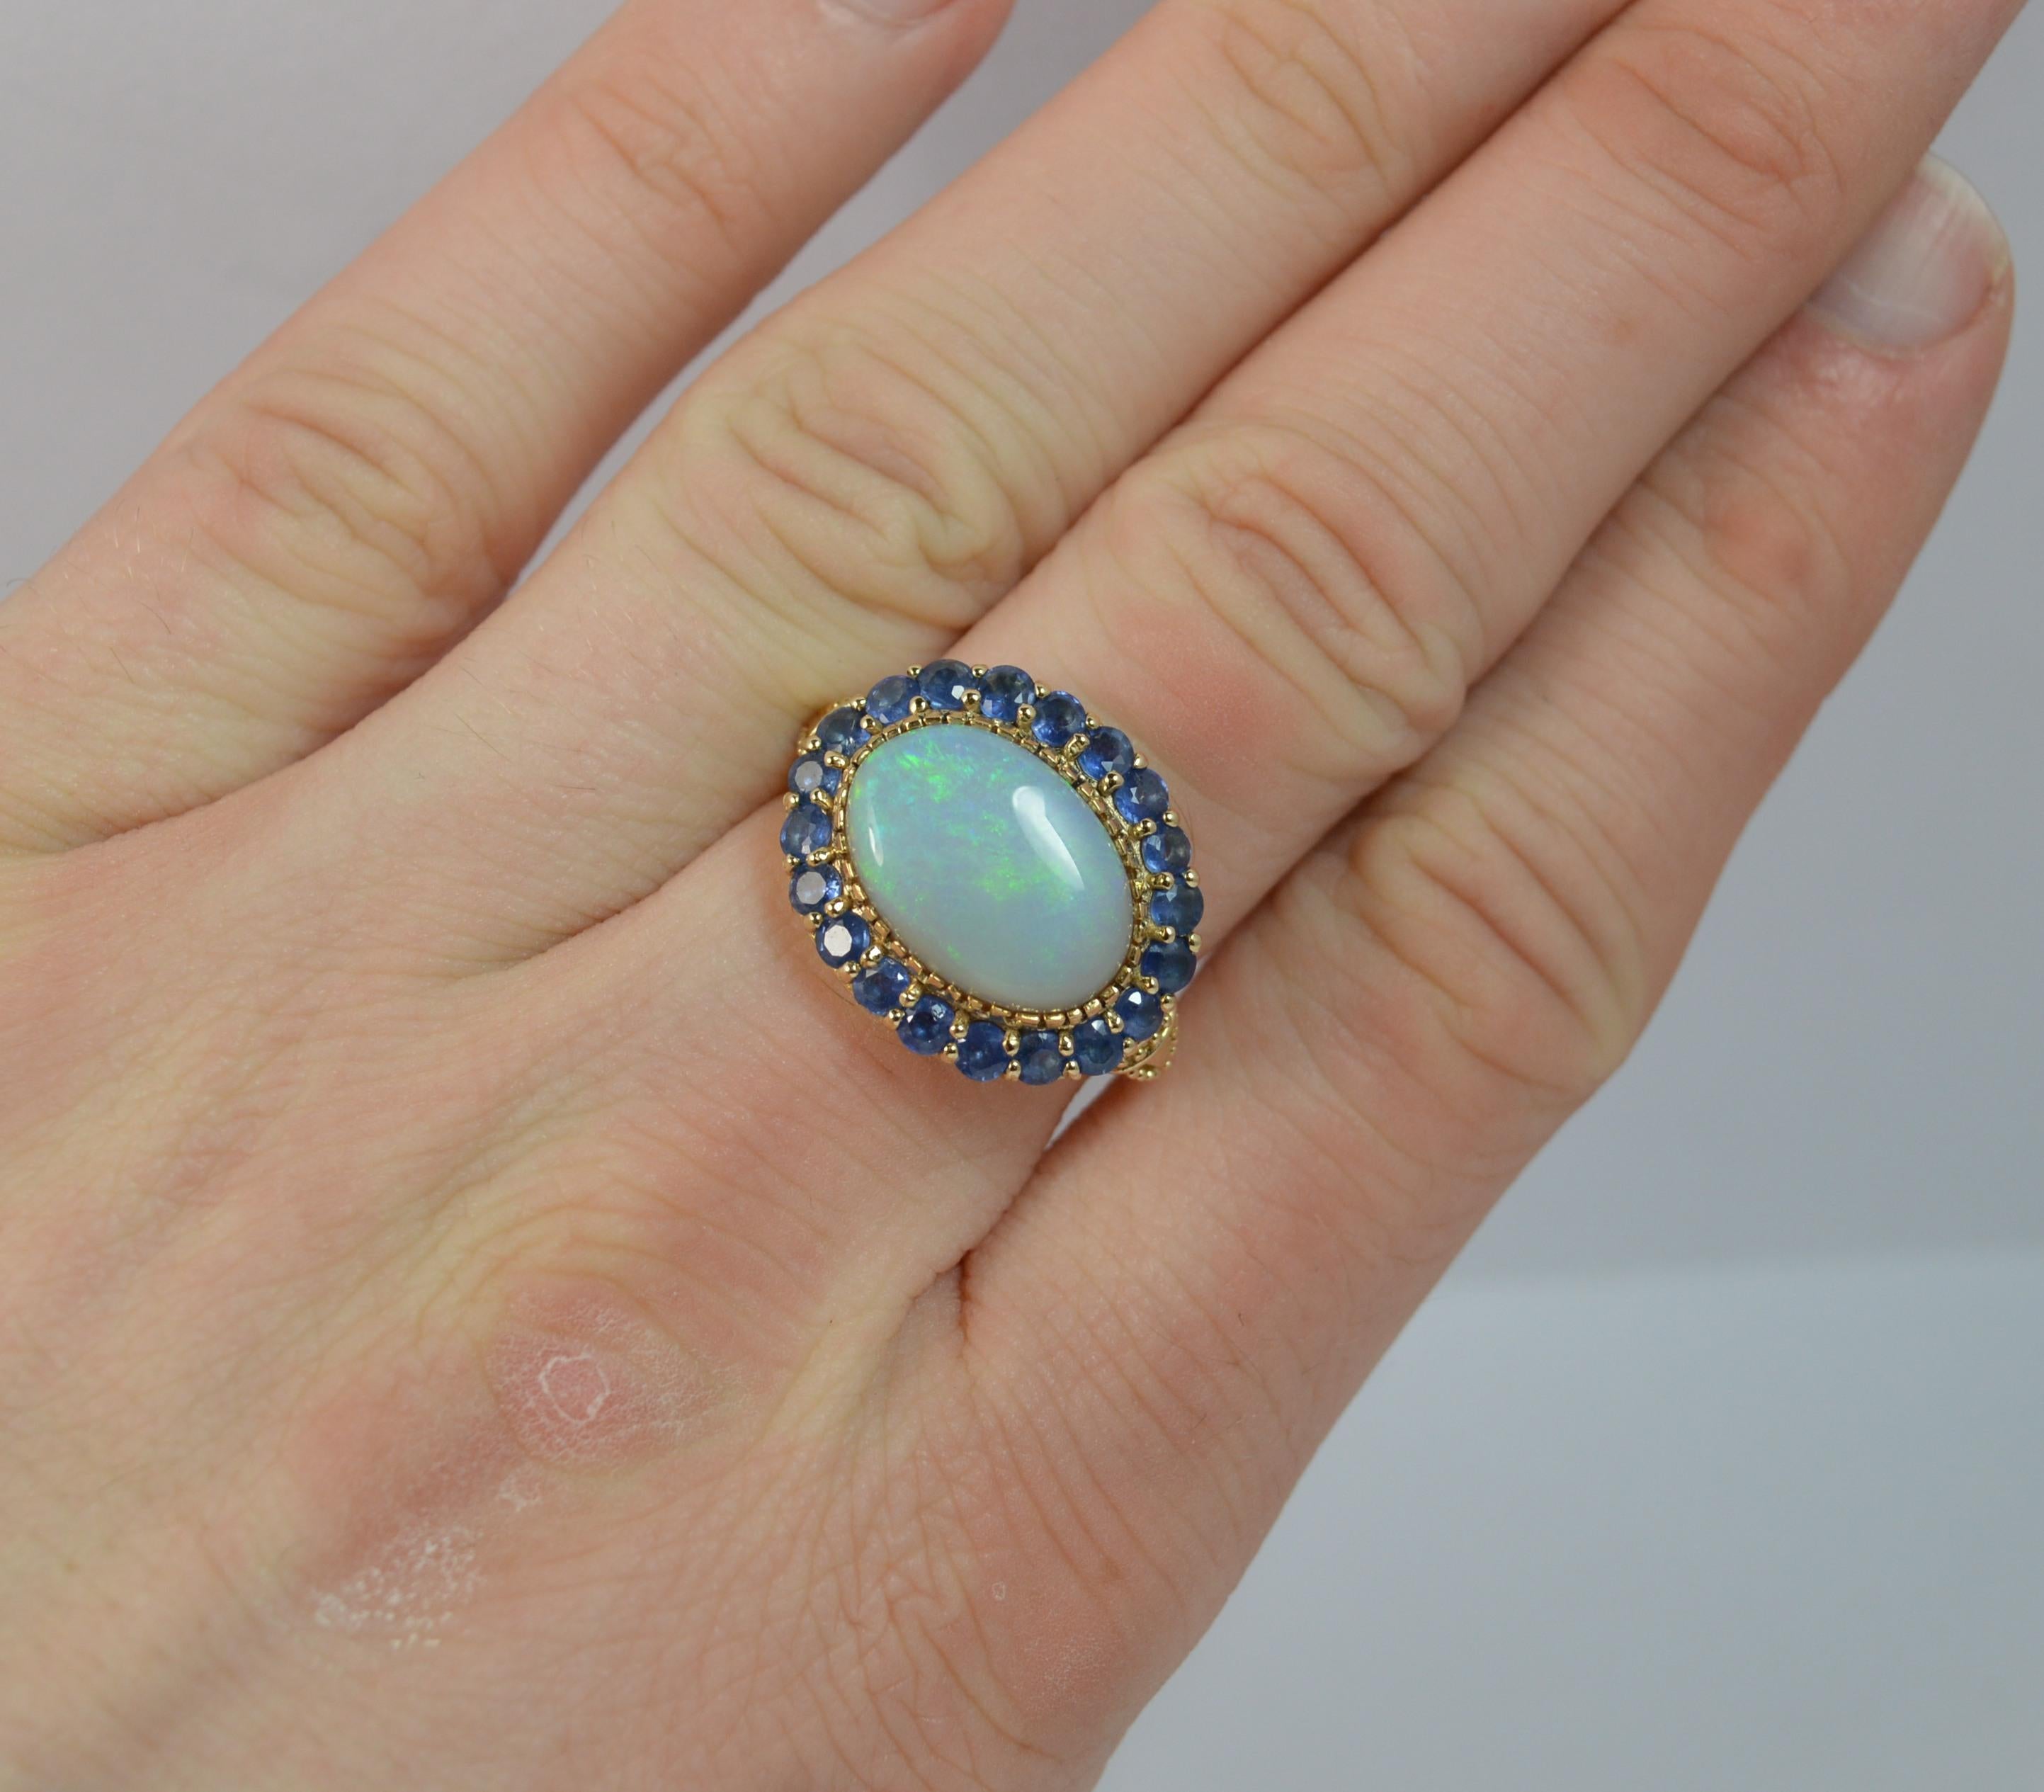 A stunning ladies cluster or cocktail ring.
SIZE ; N 1/2 UK, 7 US
A solid 9 carat yellow gold example.

Set with a single opal to the centre, 10mm x 14mm with blue and green undertone. 

Surrounding are beautifully blue round cut sapphires.

19mm x